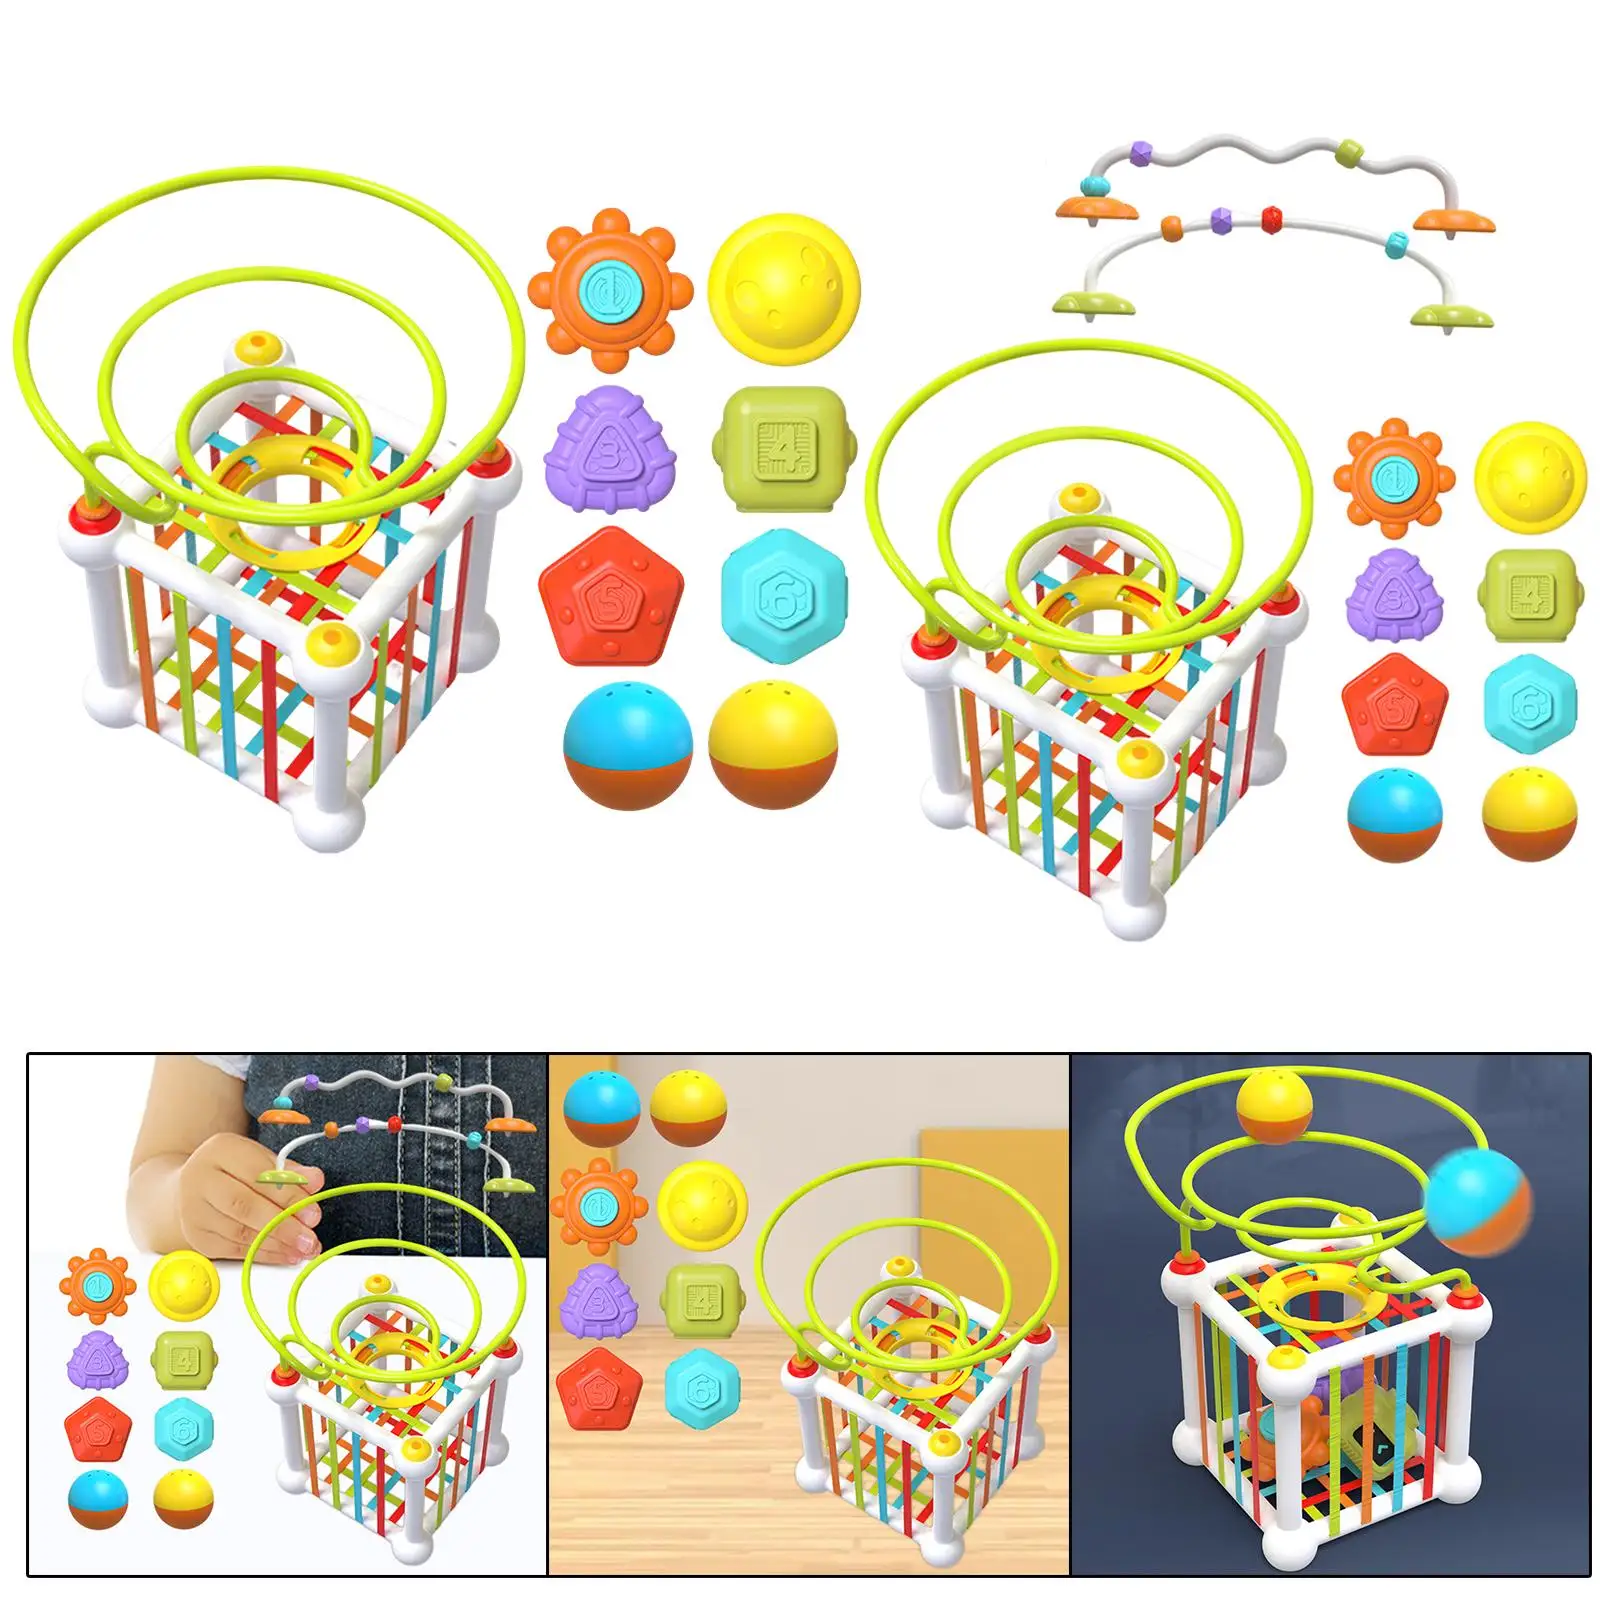 Textured Balls Sorting Games Matching for Coordination Imagination Activity